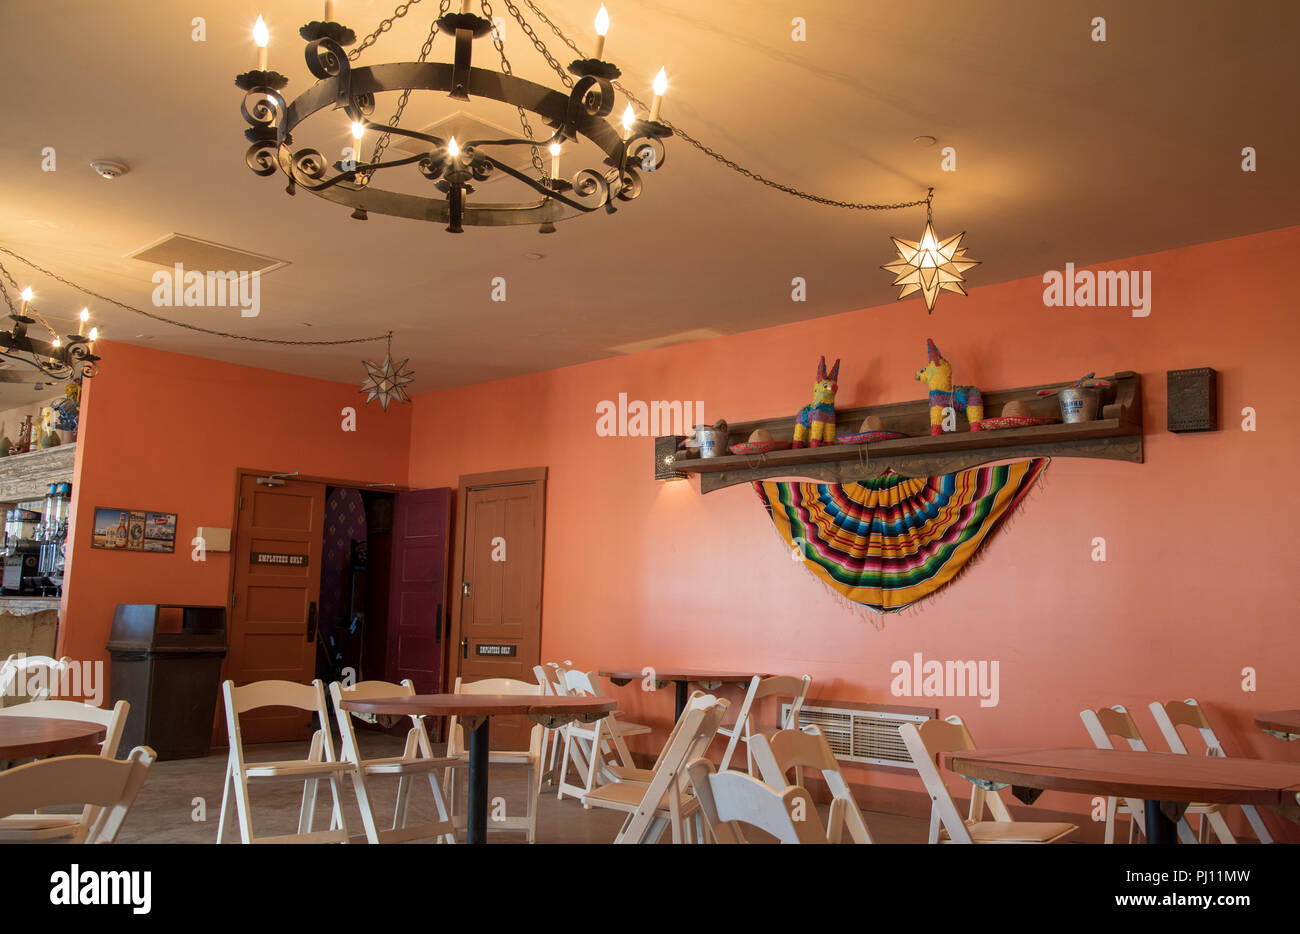 Interior of Restaurant and bar with folding chairs and western wall display, old candle style ceiling light fixture. Stock Photo